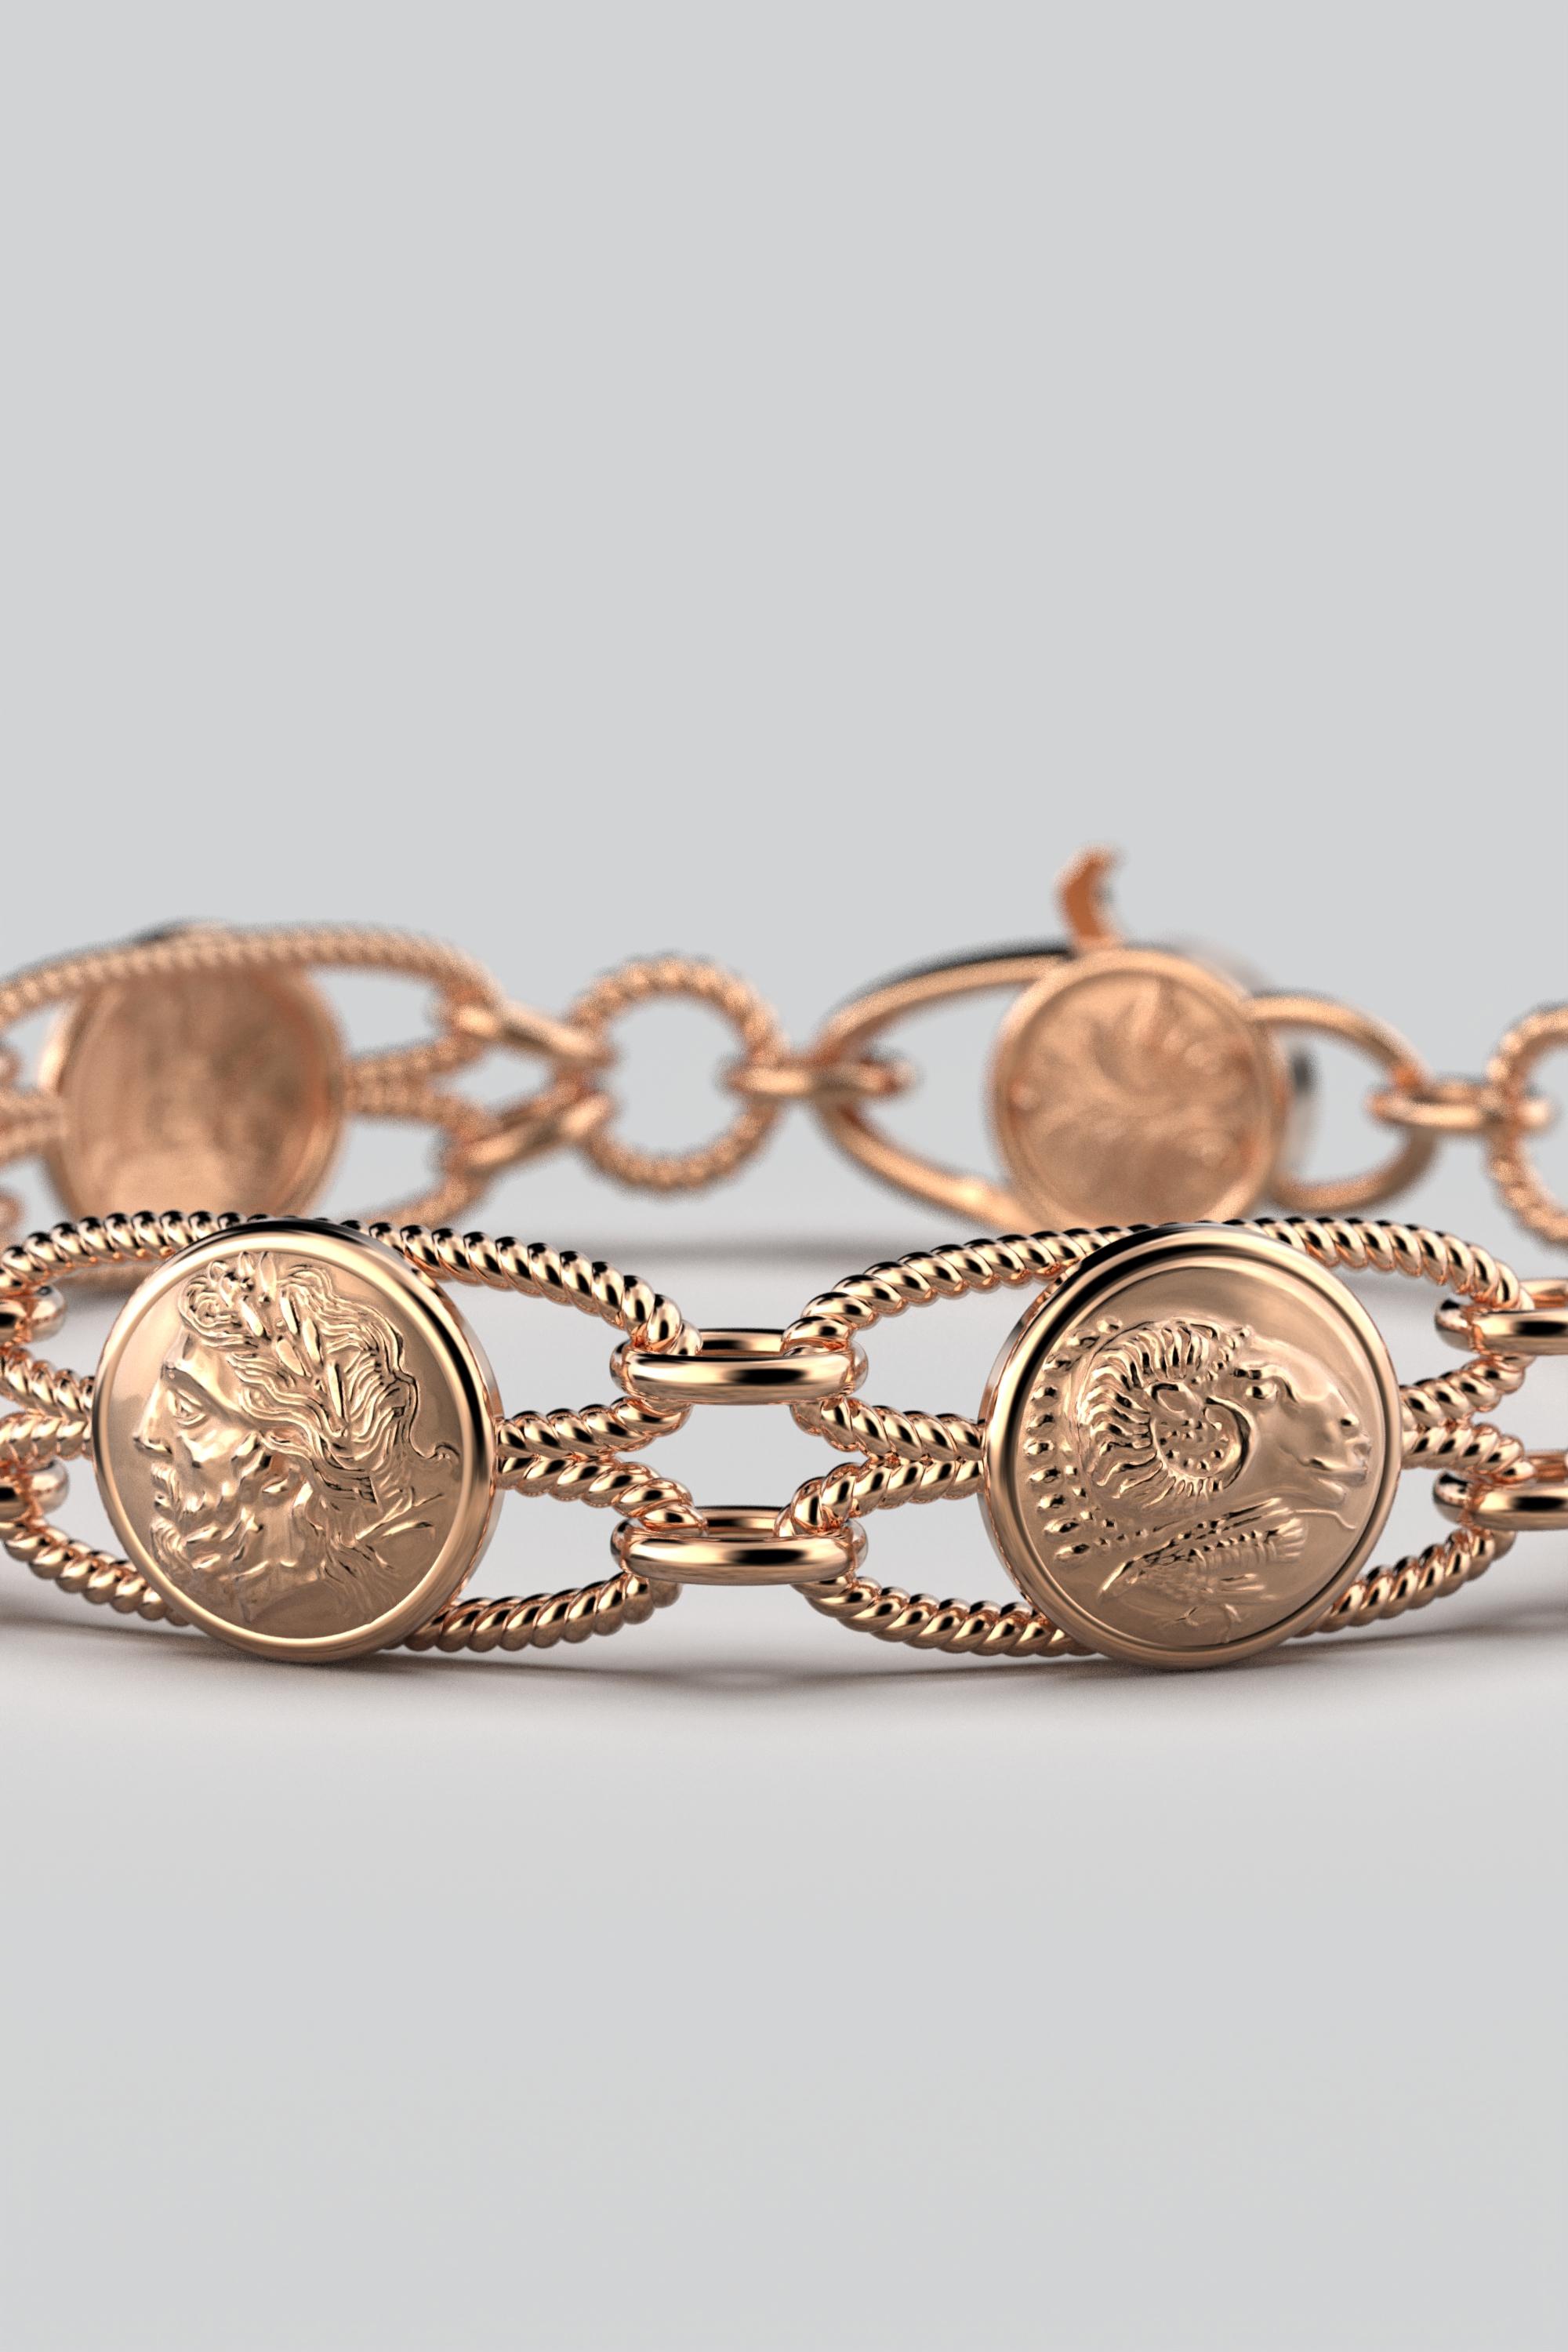 Women's Italian Bracelet in 14k Gold Made in Italy by Oltremare Gioielli, Greek Style For Sale